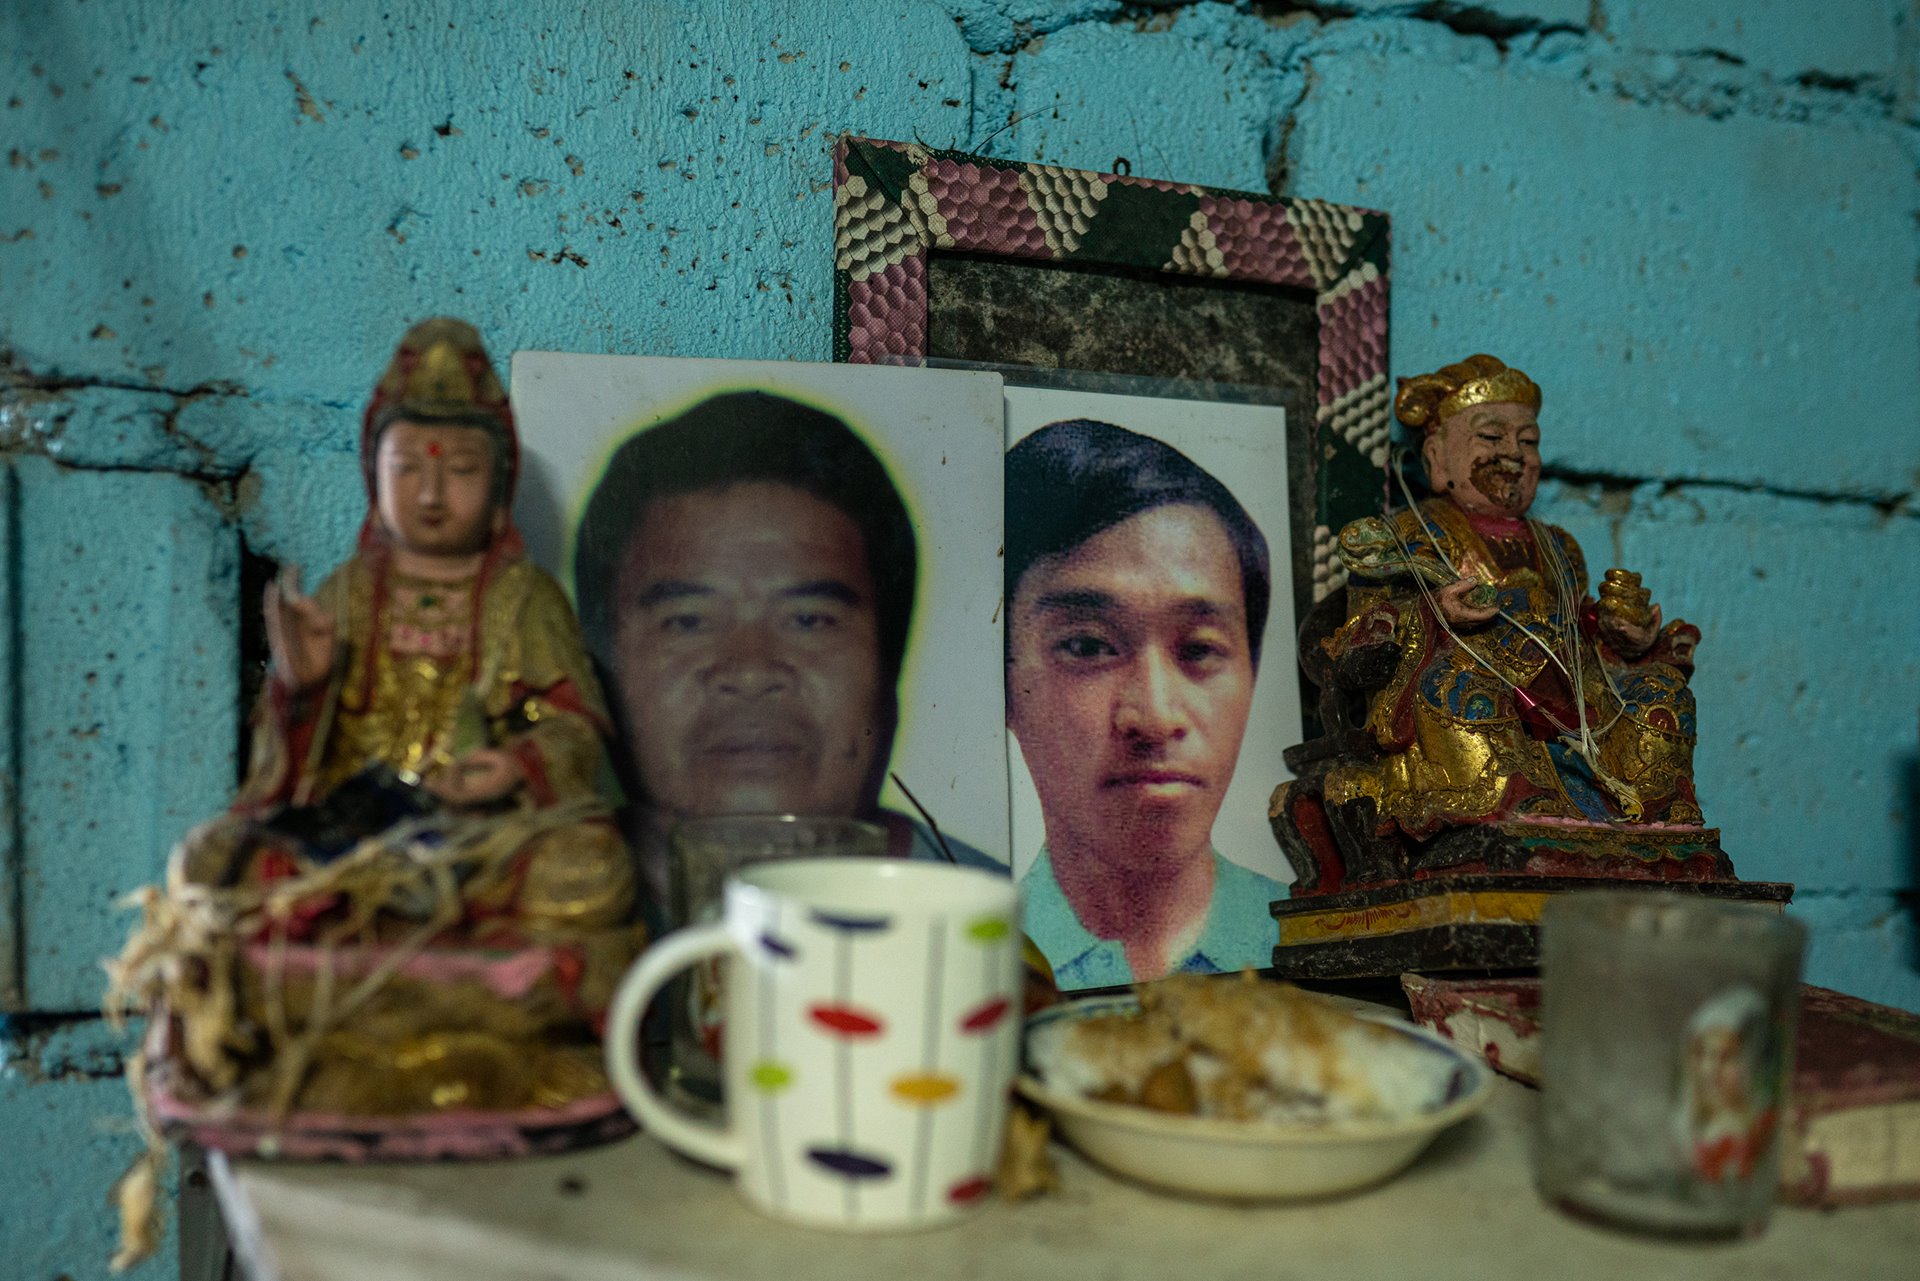 Food offerings lie before photographs of Anita Lerio&rsquo;s husband and son, at a household altar in Tondo, Manila, the Philippines. Her son Julius was killed in 2017, while her husband, Bugo, was killed in 2019. Since then, Anita had undergone counseling for families of war-on-drugs victims.